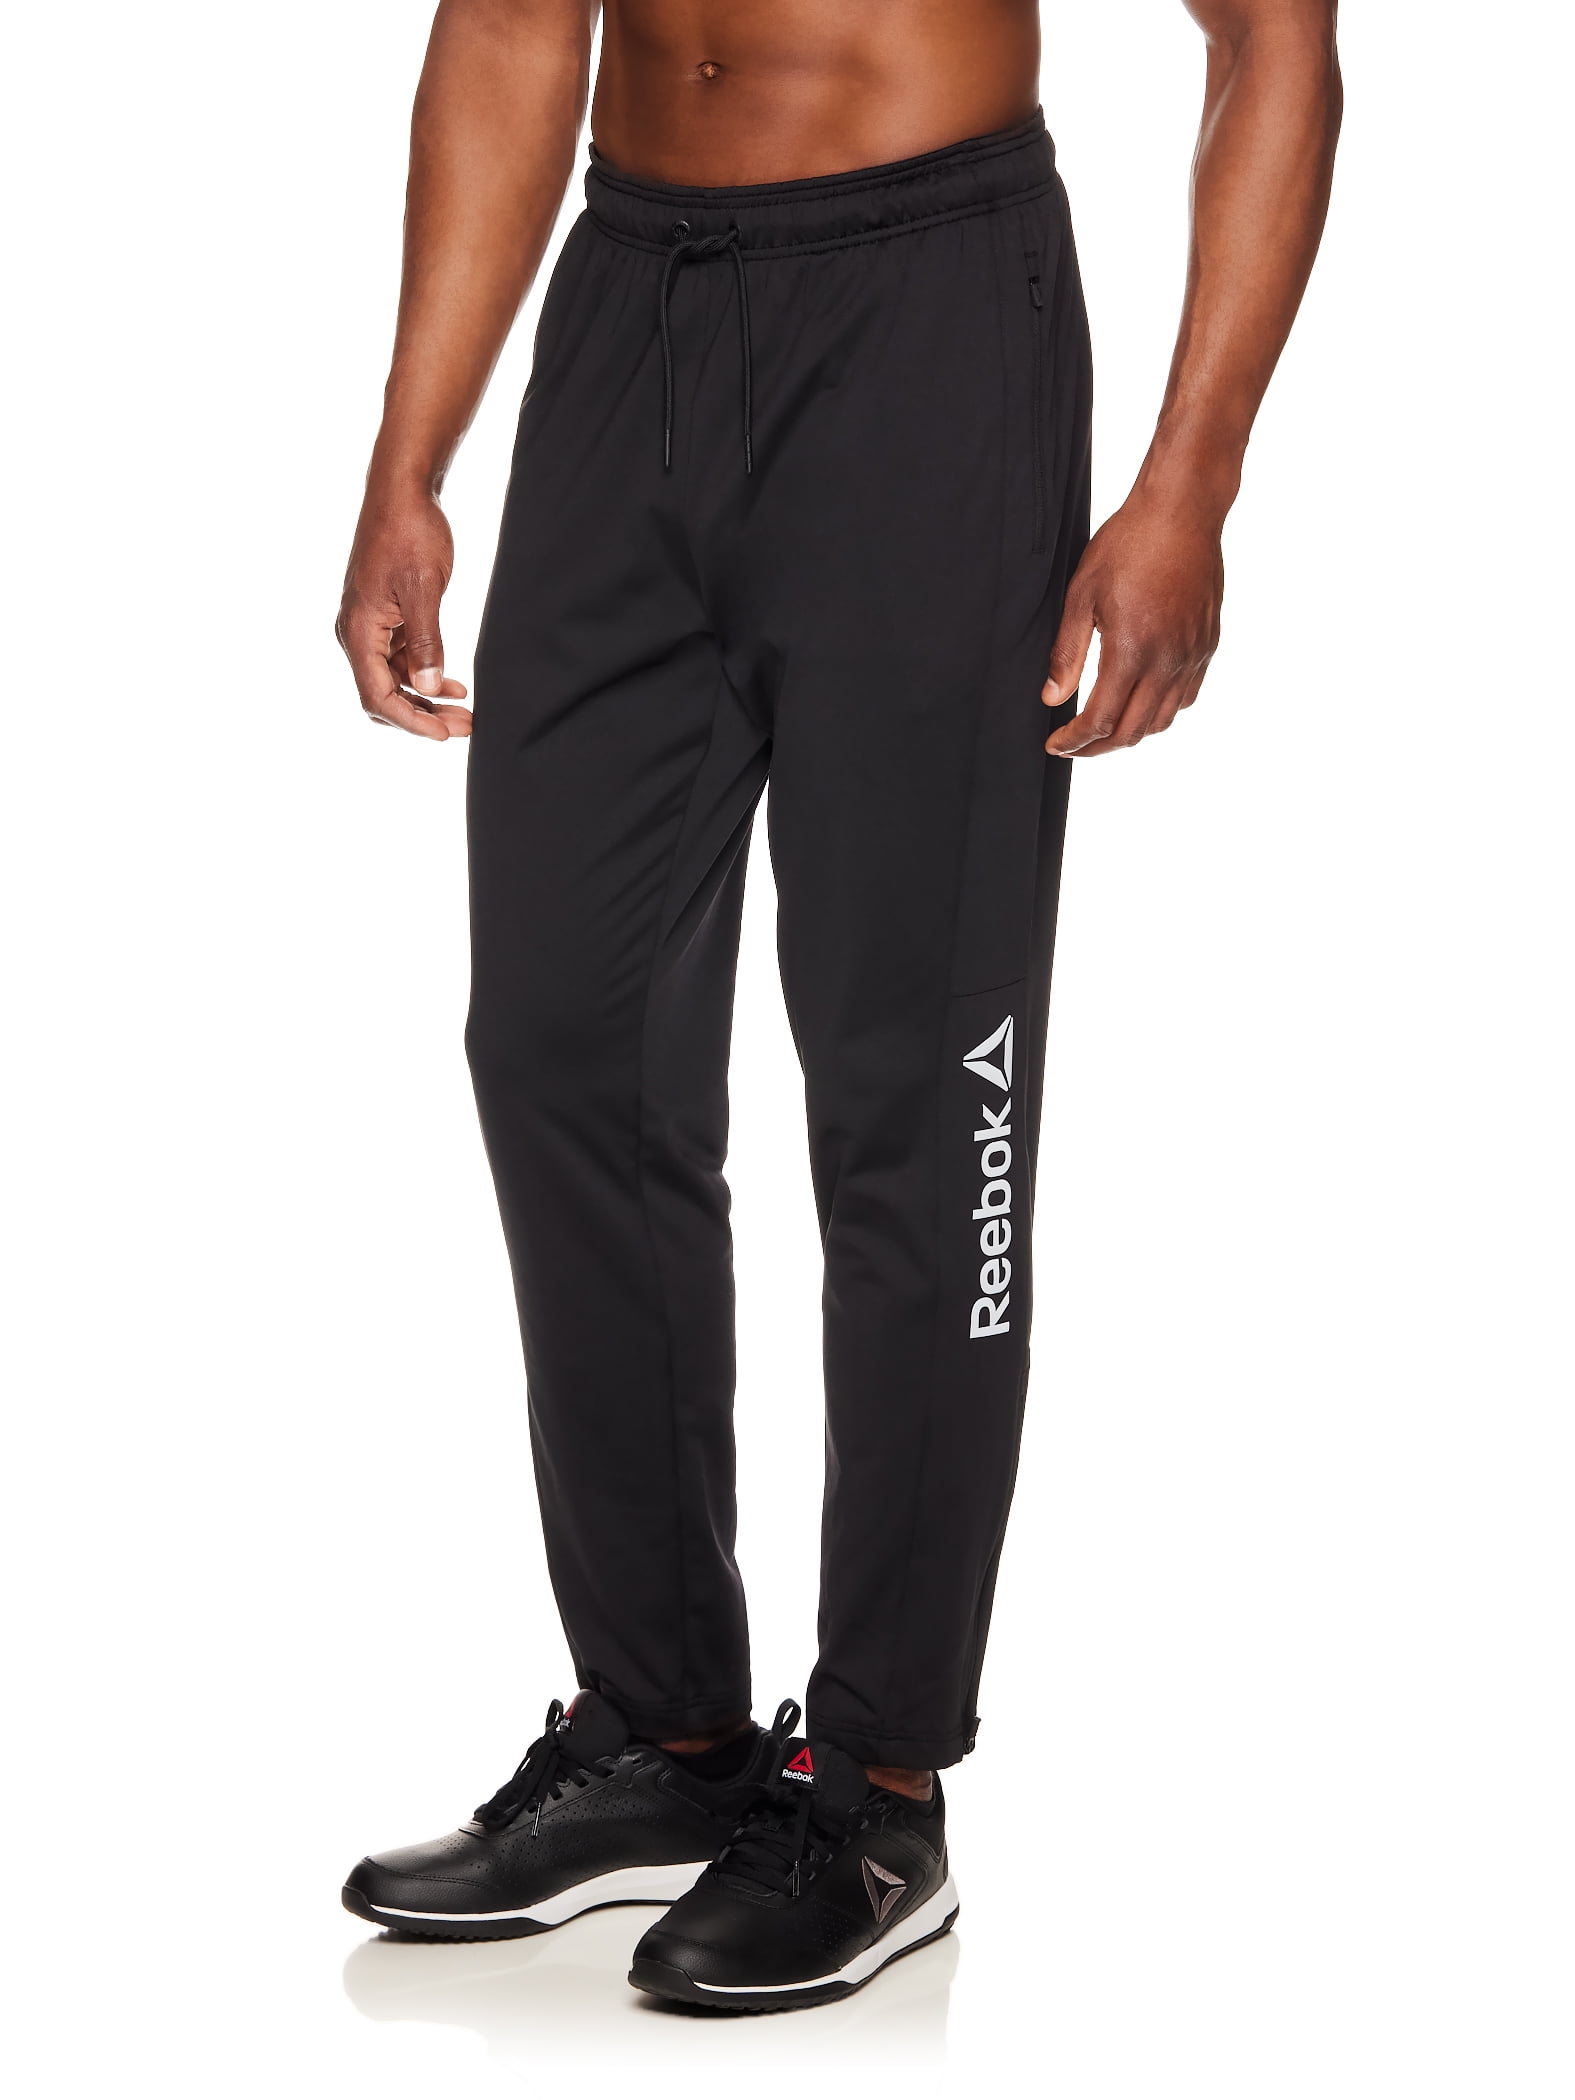 Reebok Men's and Big Men's Recharge Pants, up to Size 3XL 